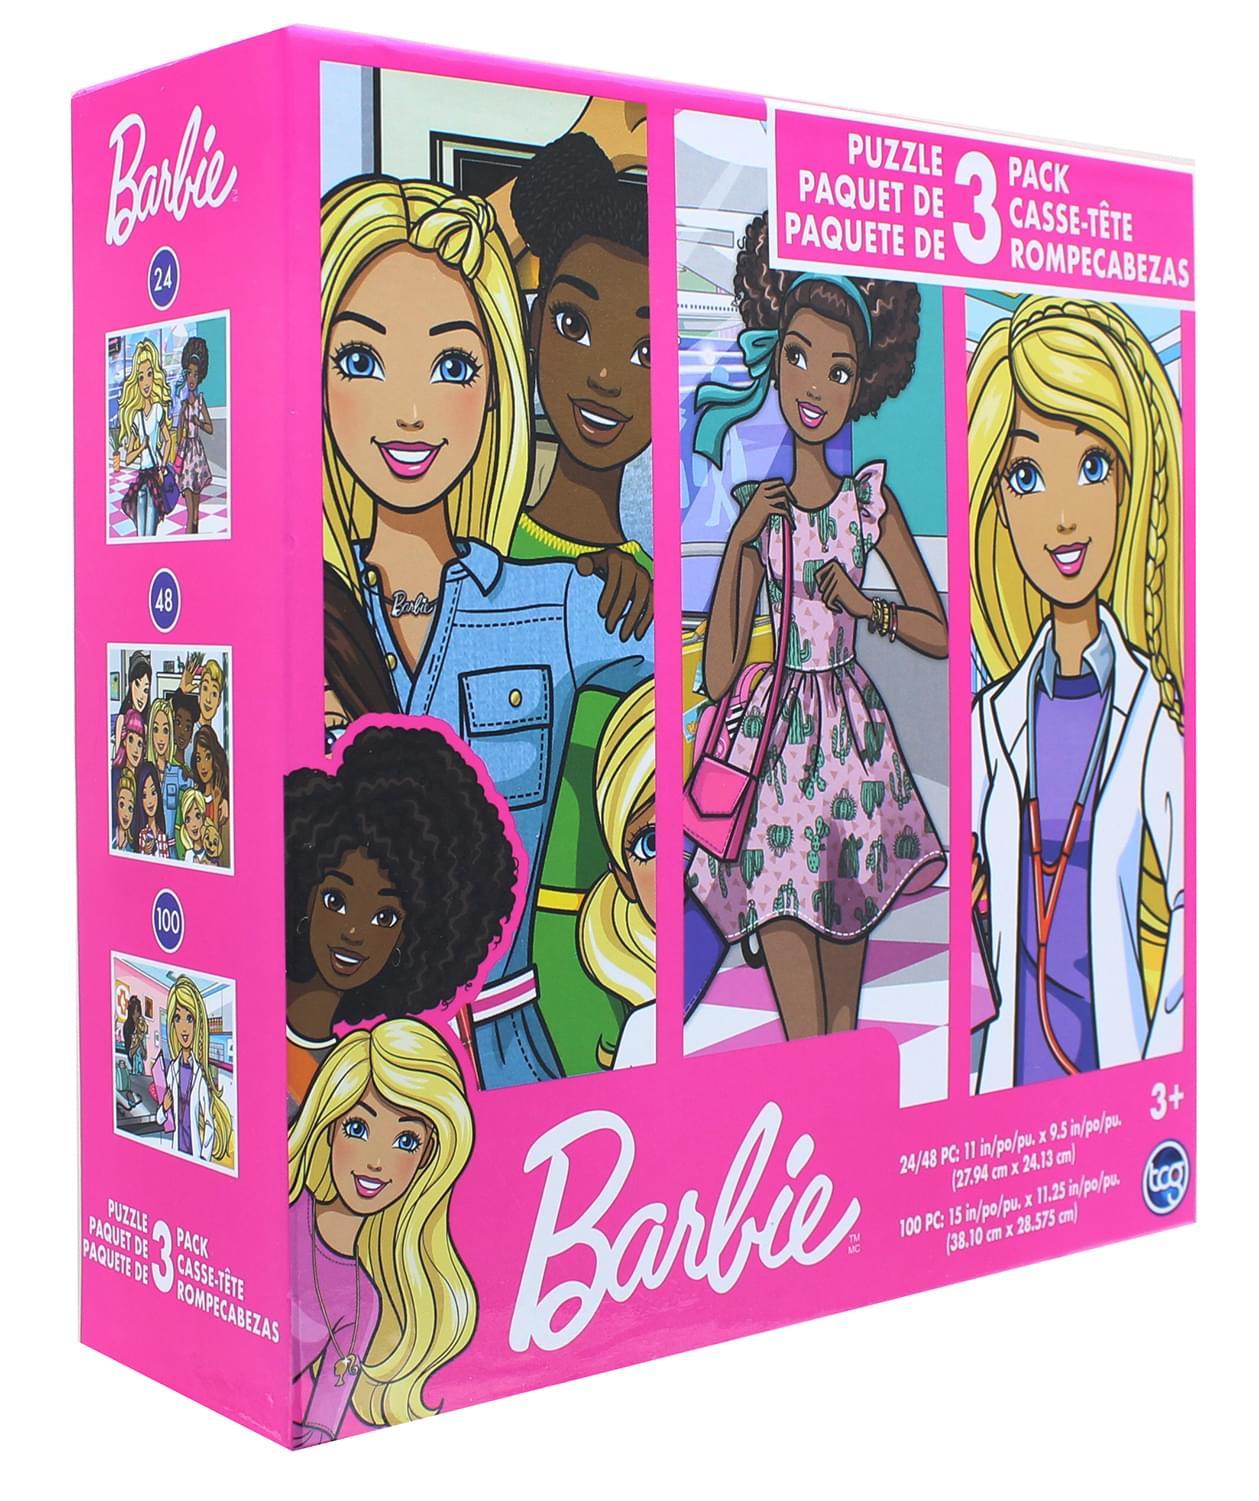 Barbie 48 Piece Lenticular Jigsaw Puzzle New and Sealed